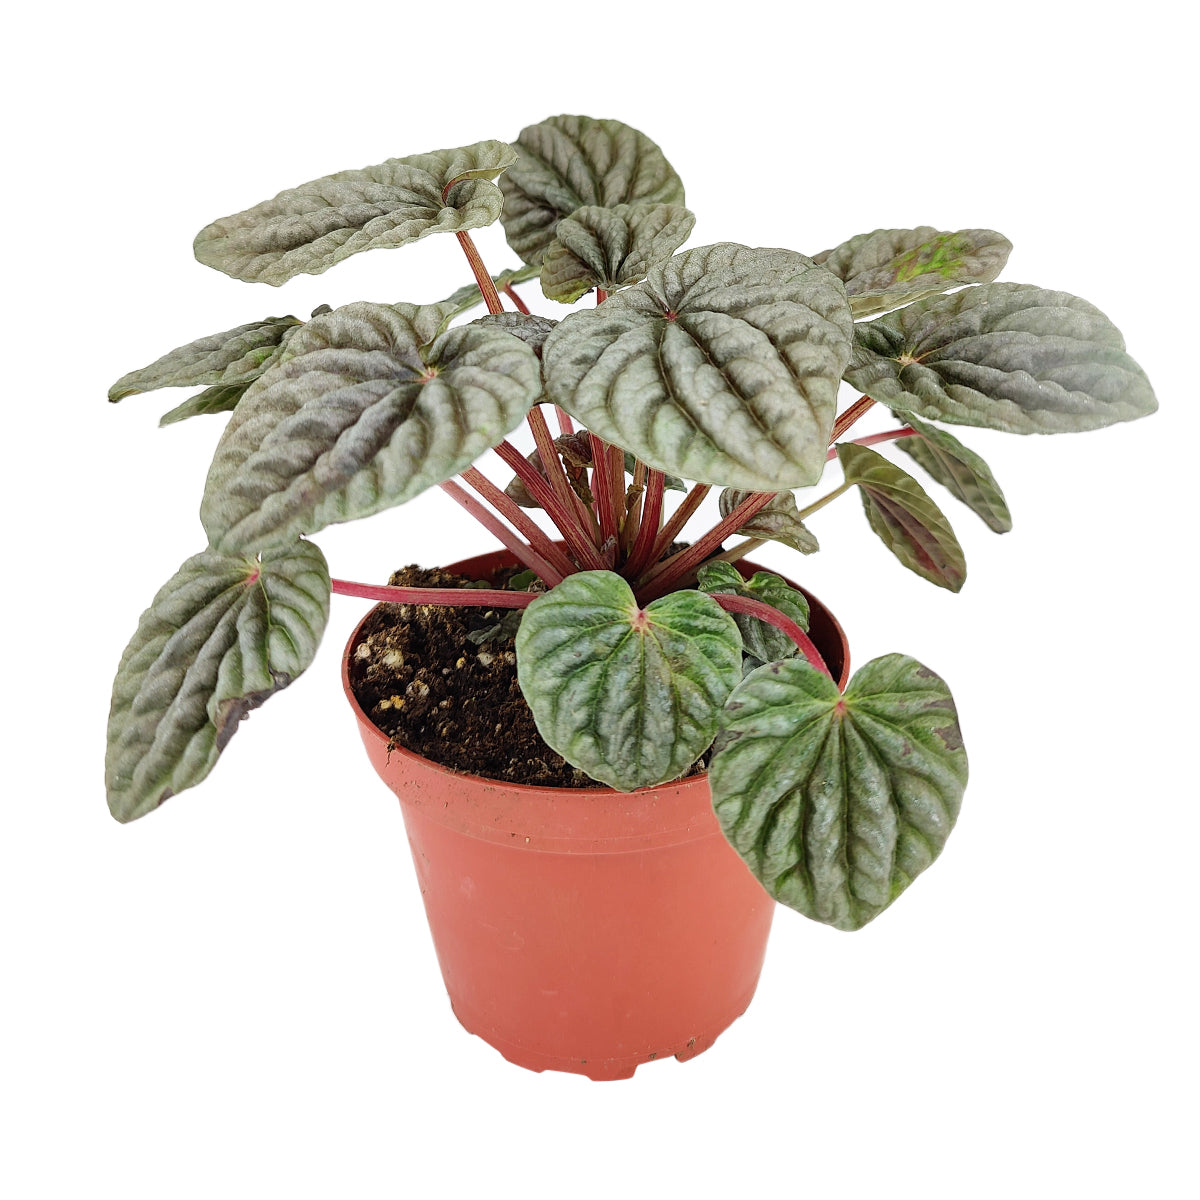 Peperomia Caperata, Emerald Ripple Pepper, Indoor Houseplants, Colorful Foliage Houseplants, Easy Care Houseplants for Beginners